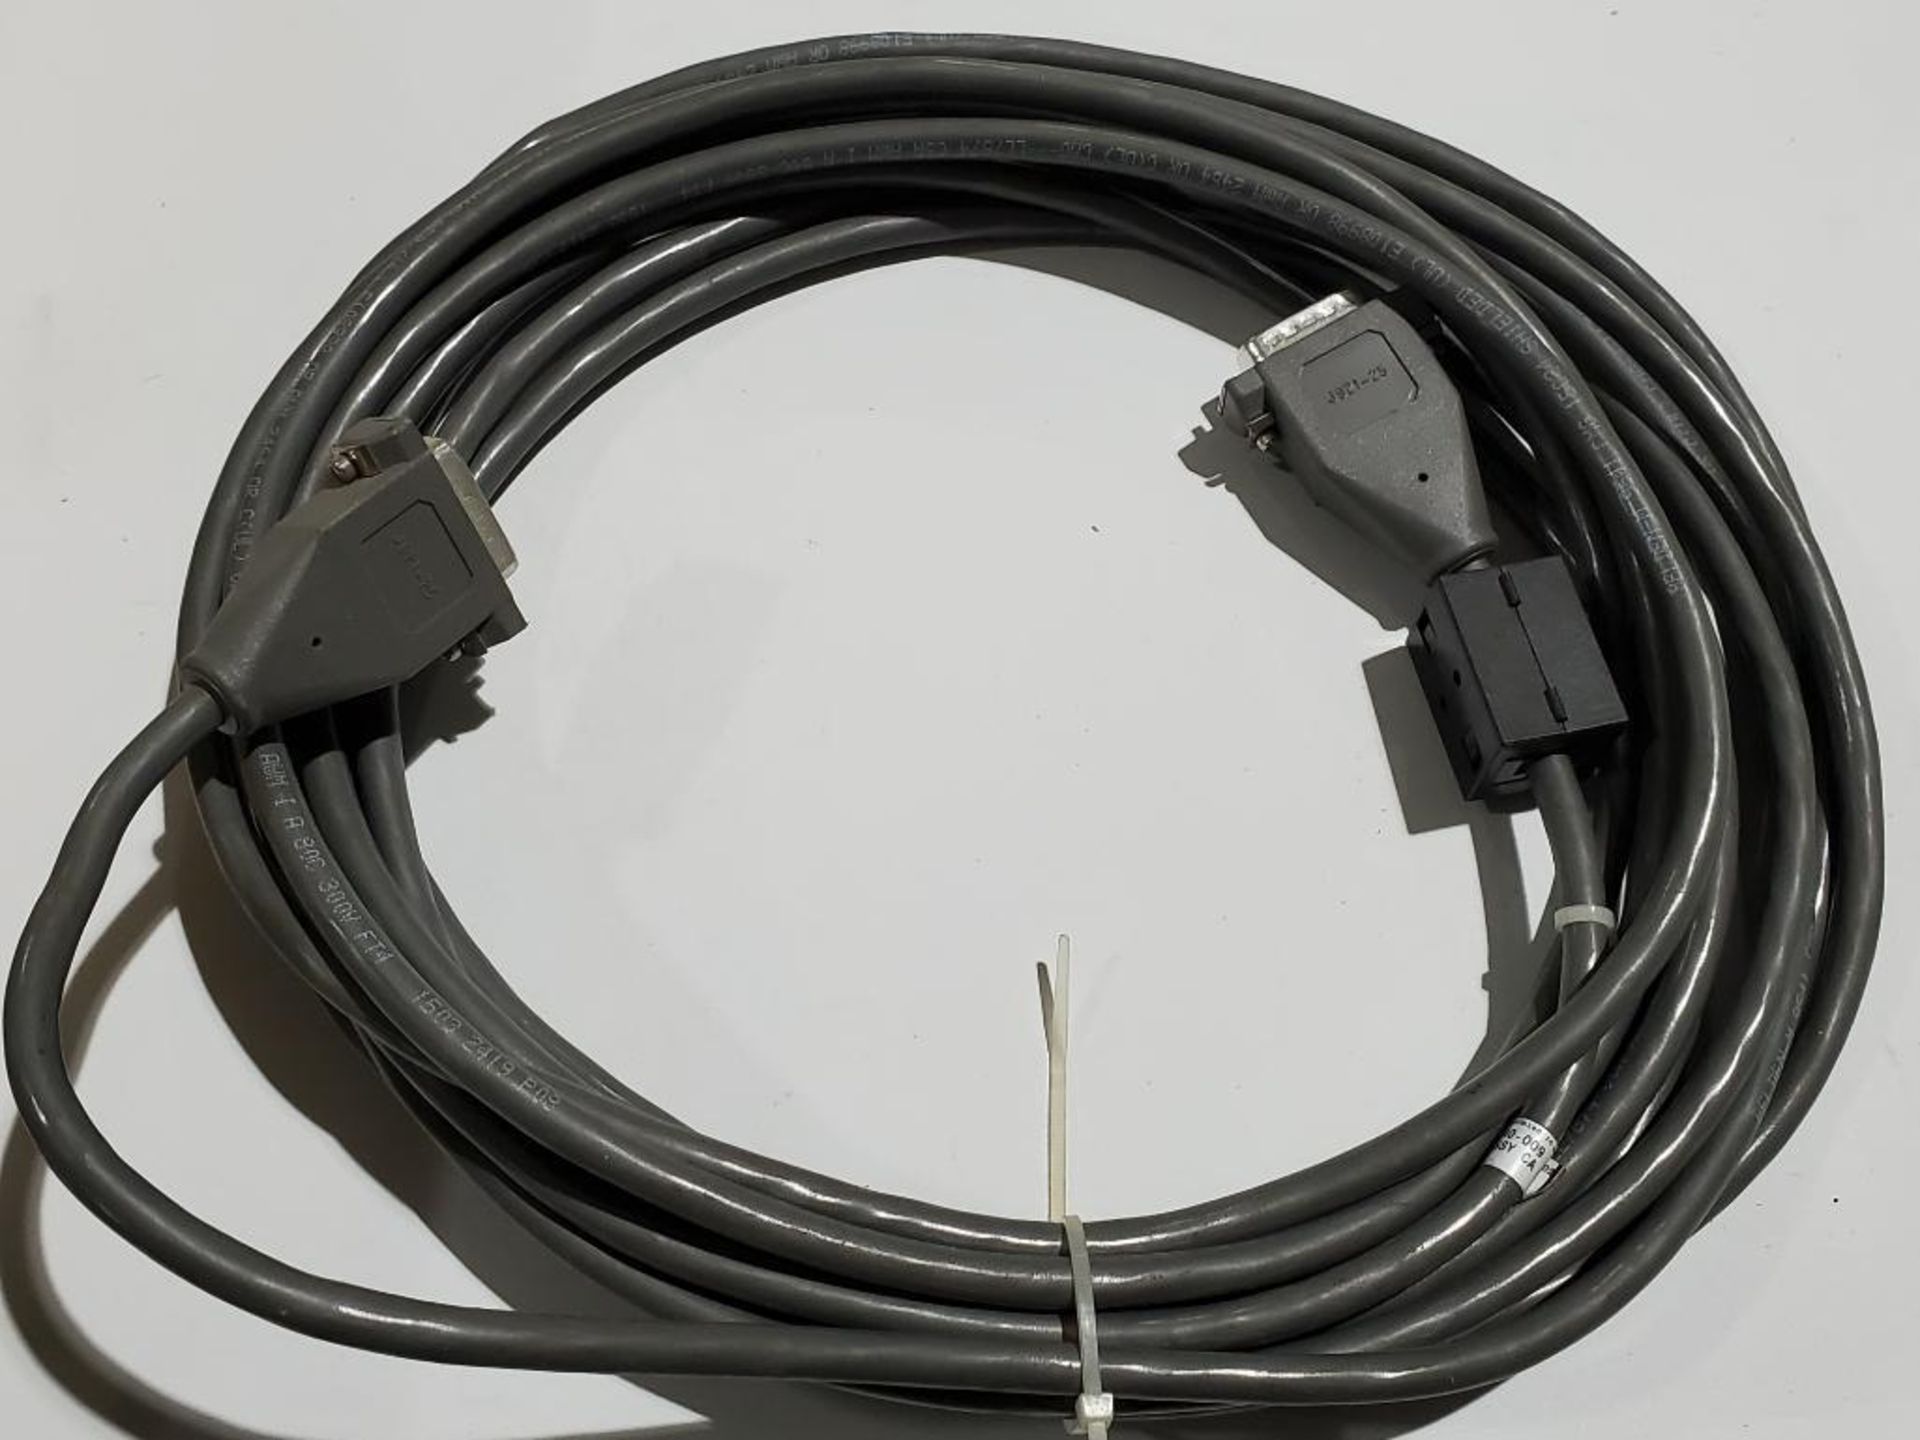 Assorted interconnect cables. - Image 6 of 9